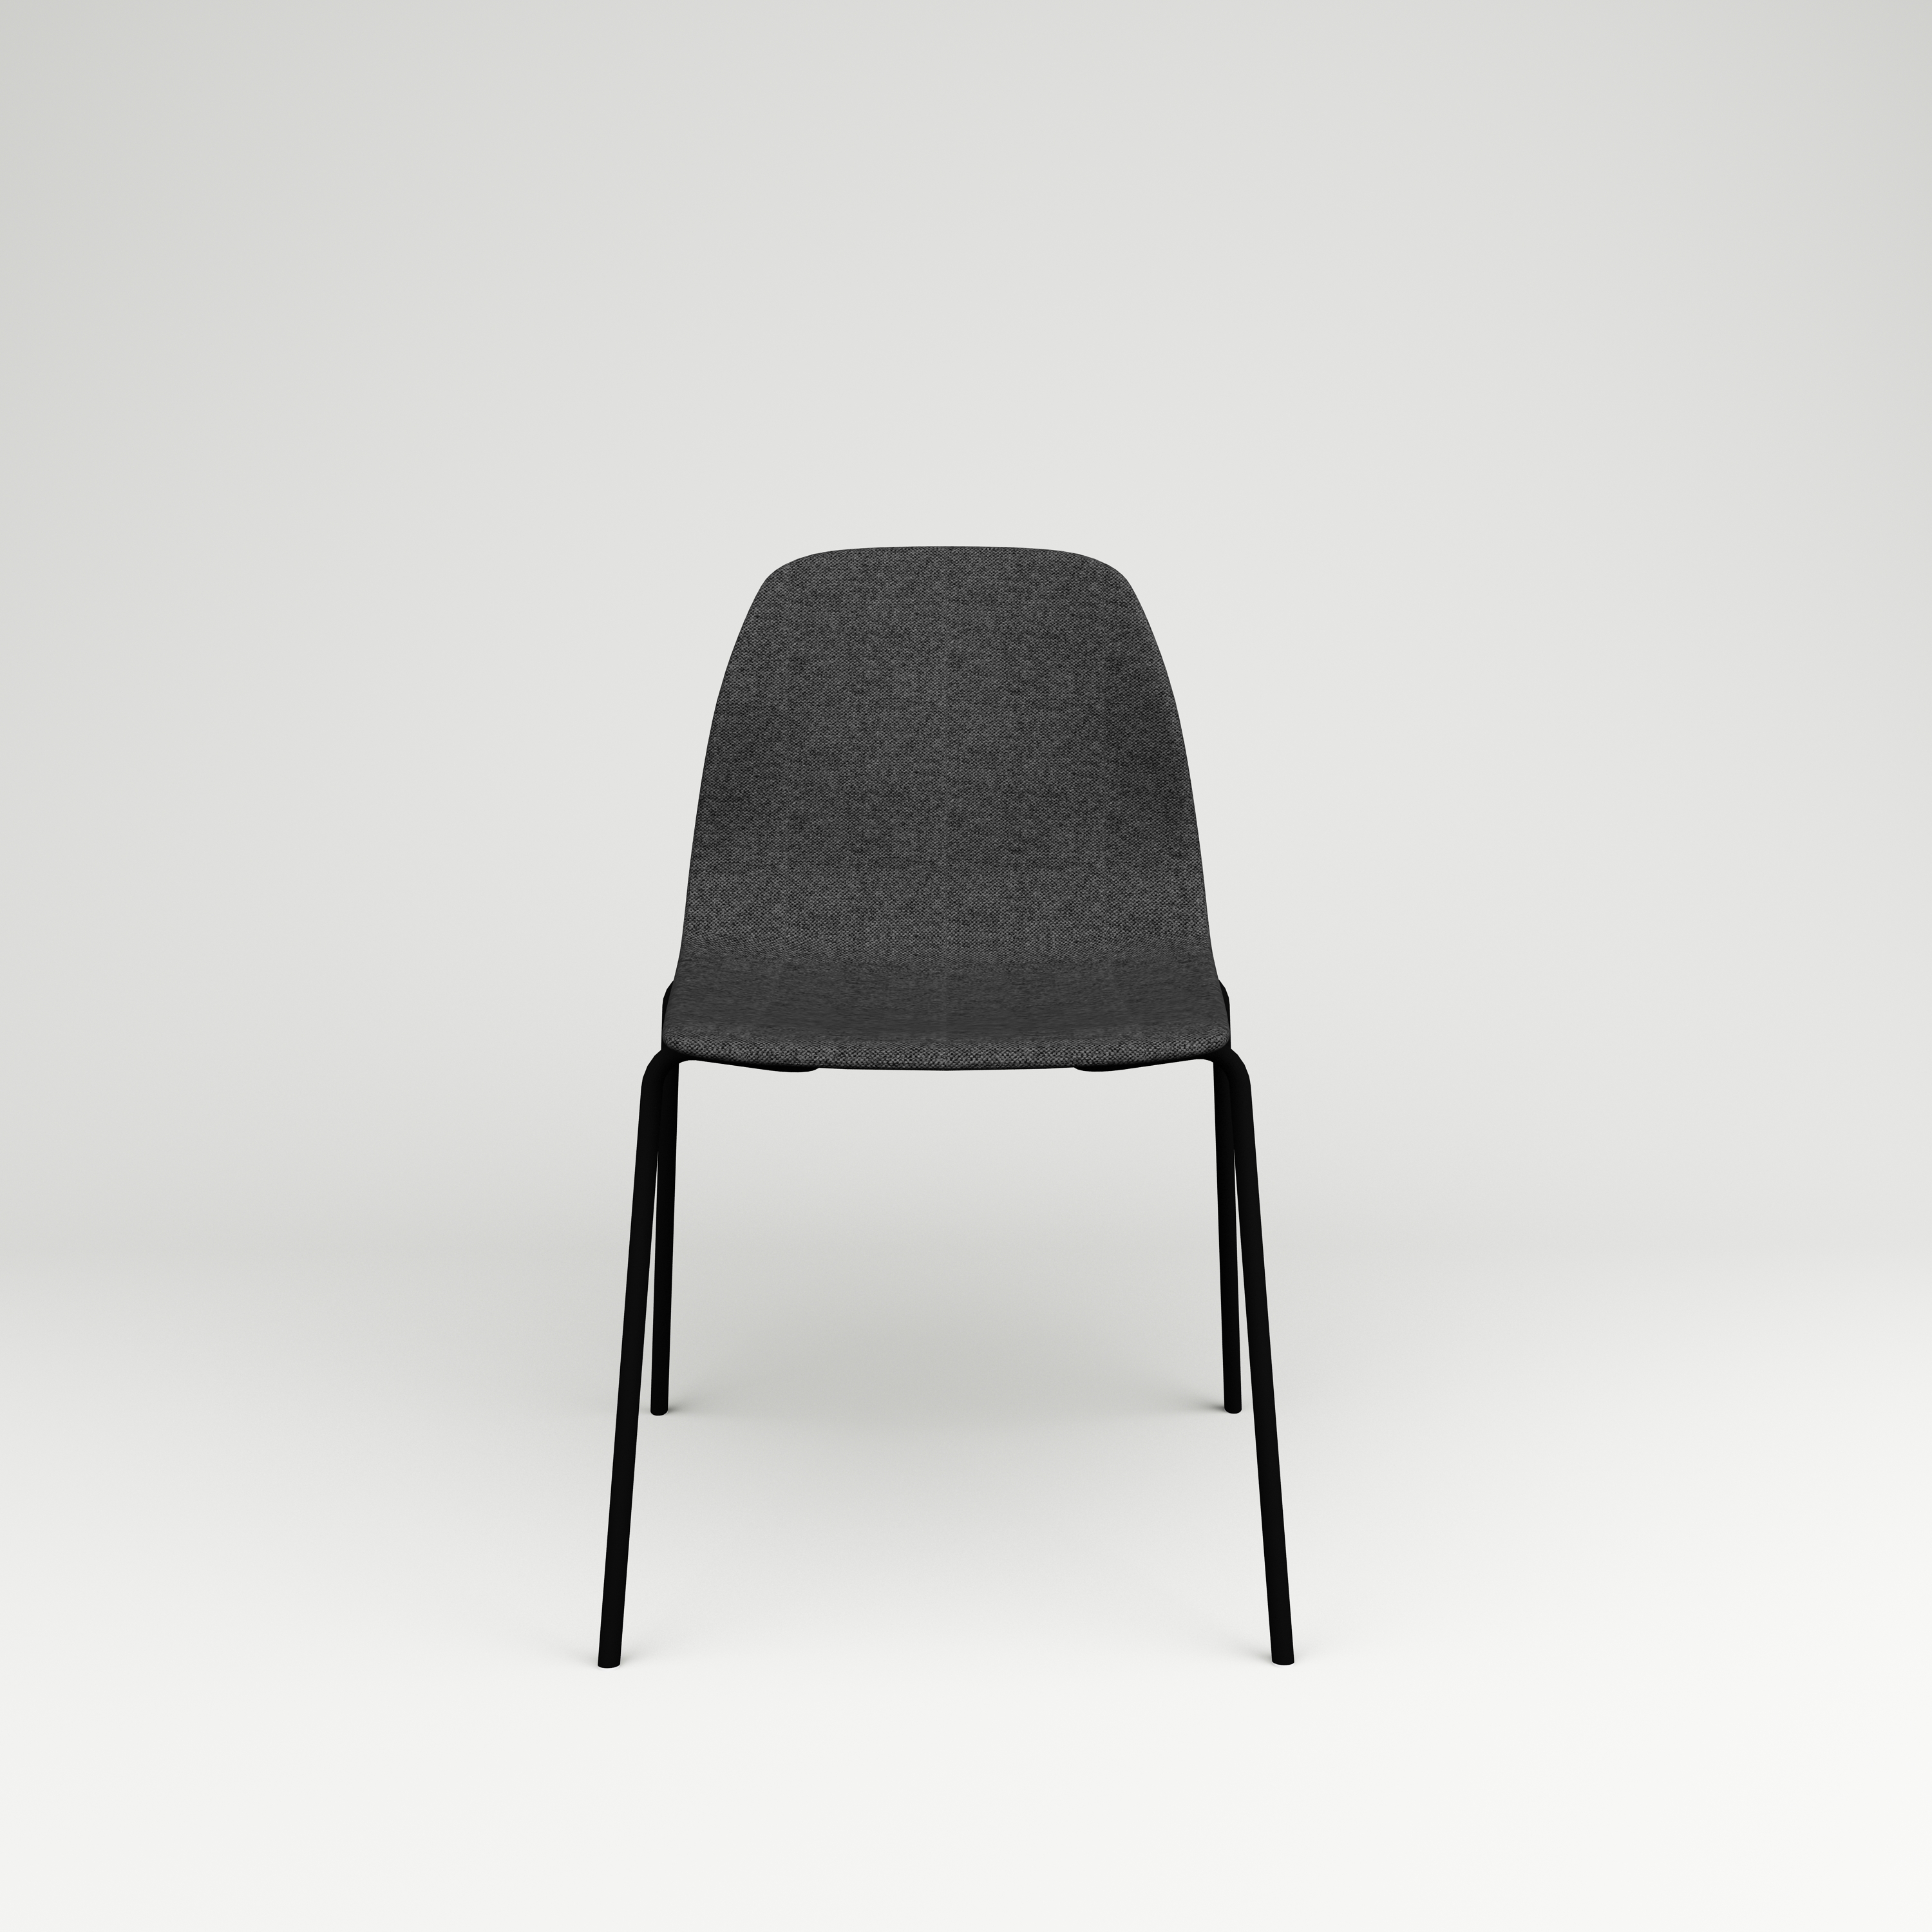 Conference chair Pelican, black leg stand, graphite gray upholstery